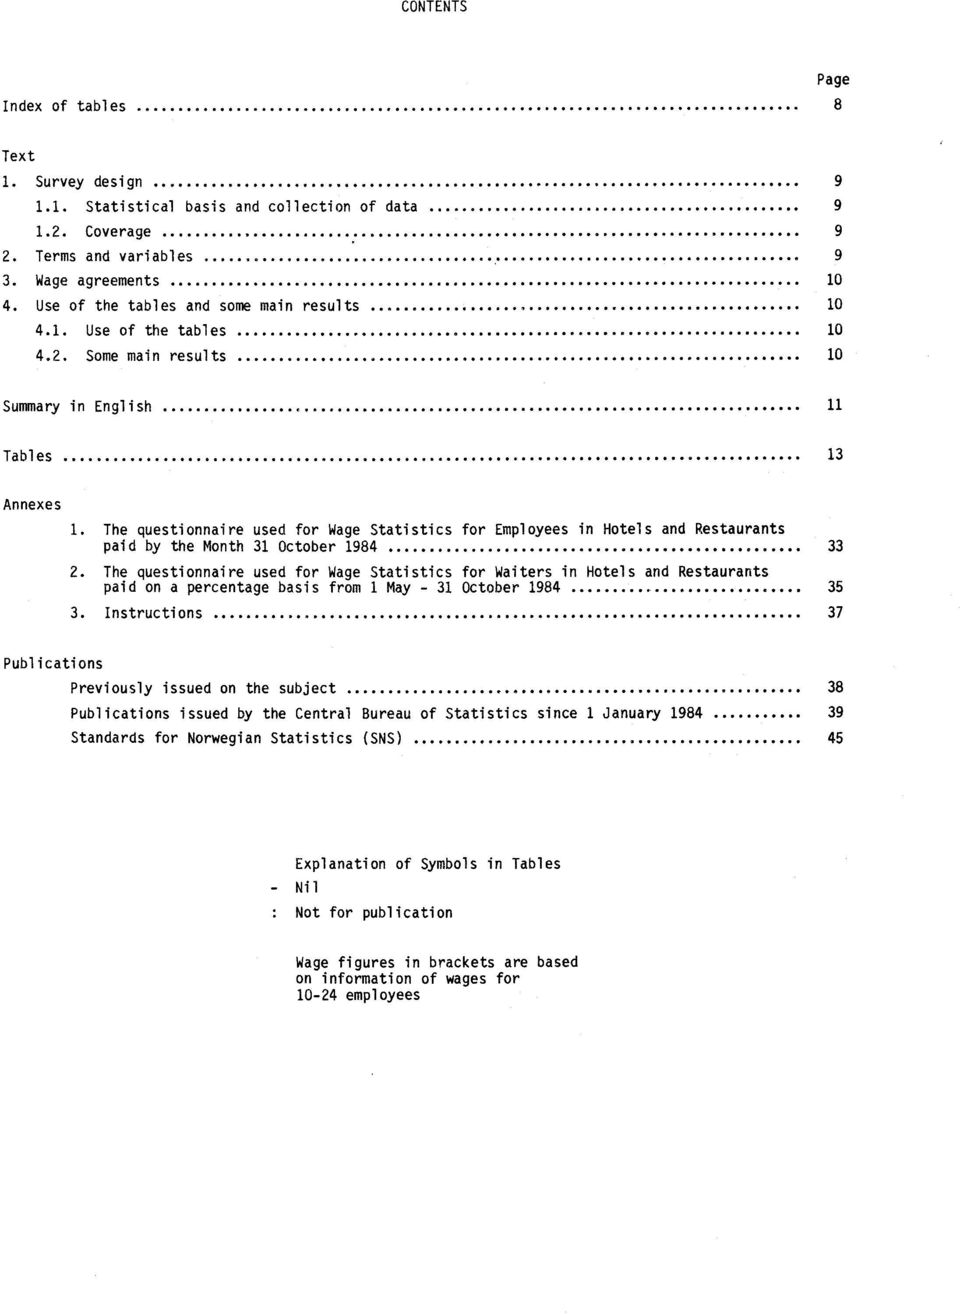 The questionnaire used for Wage Statistics for Employees in Hotels and Restaurants paid by the Month 31 October 1984 33 2.